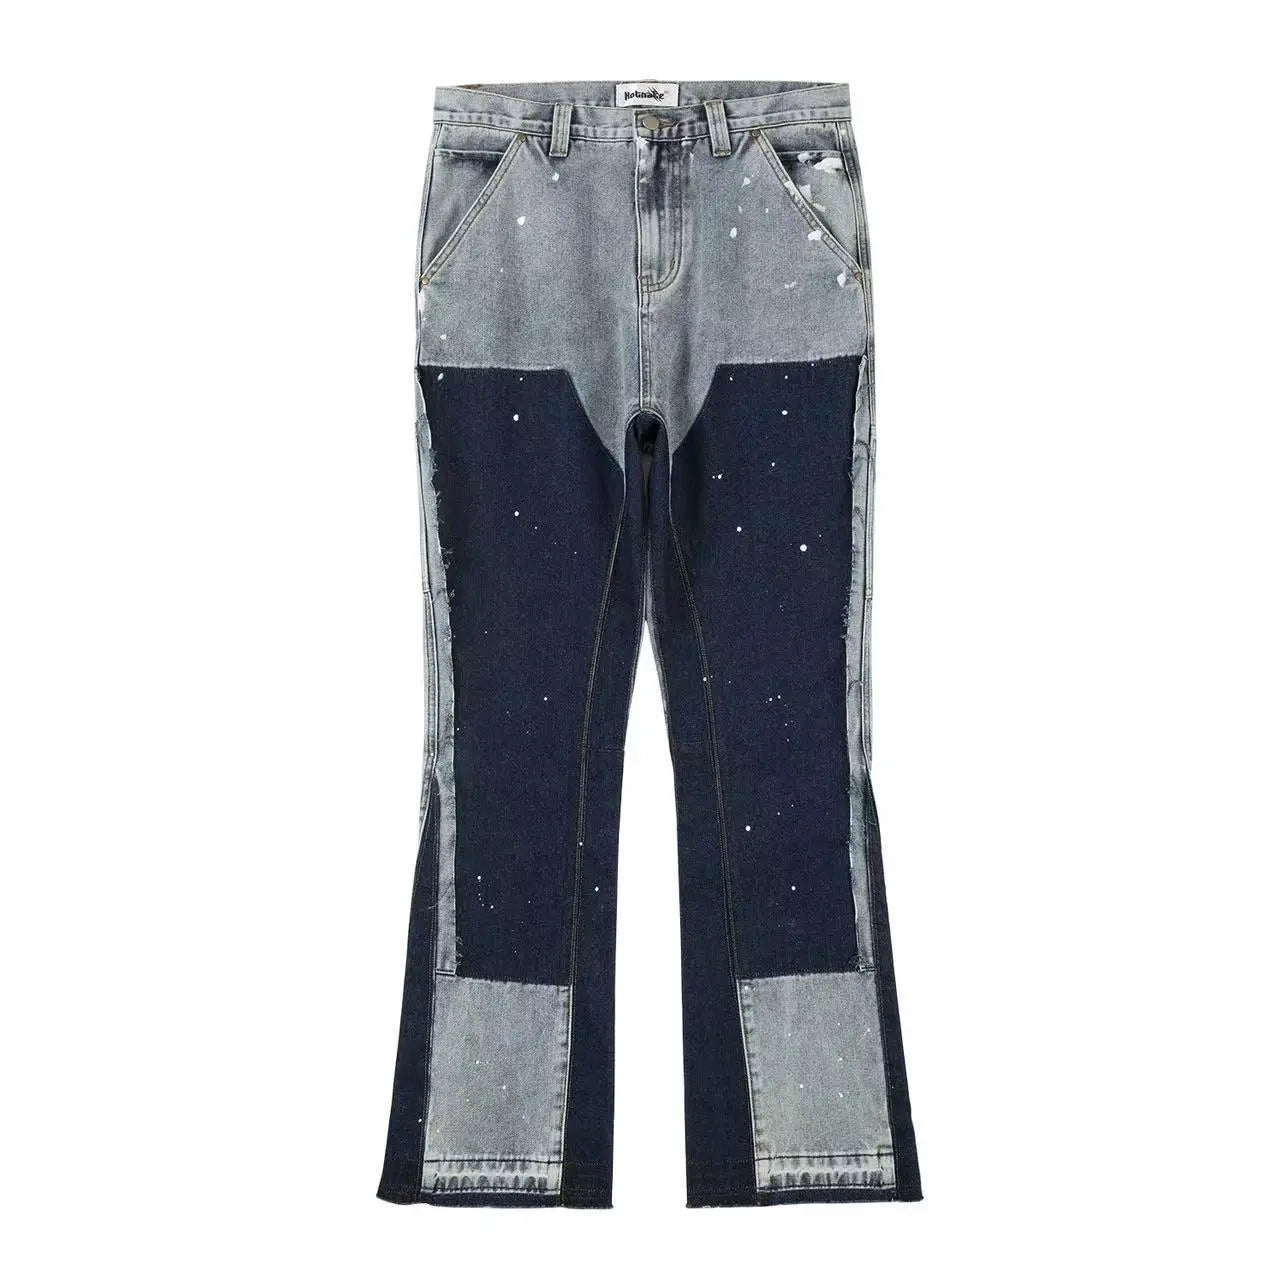 Urban Style: 2023 Graffiti Black Flared Denim Pants - Vintage Hip Hop Vibes with Patches and Splashed Ink